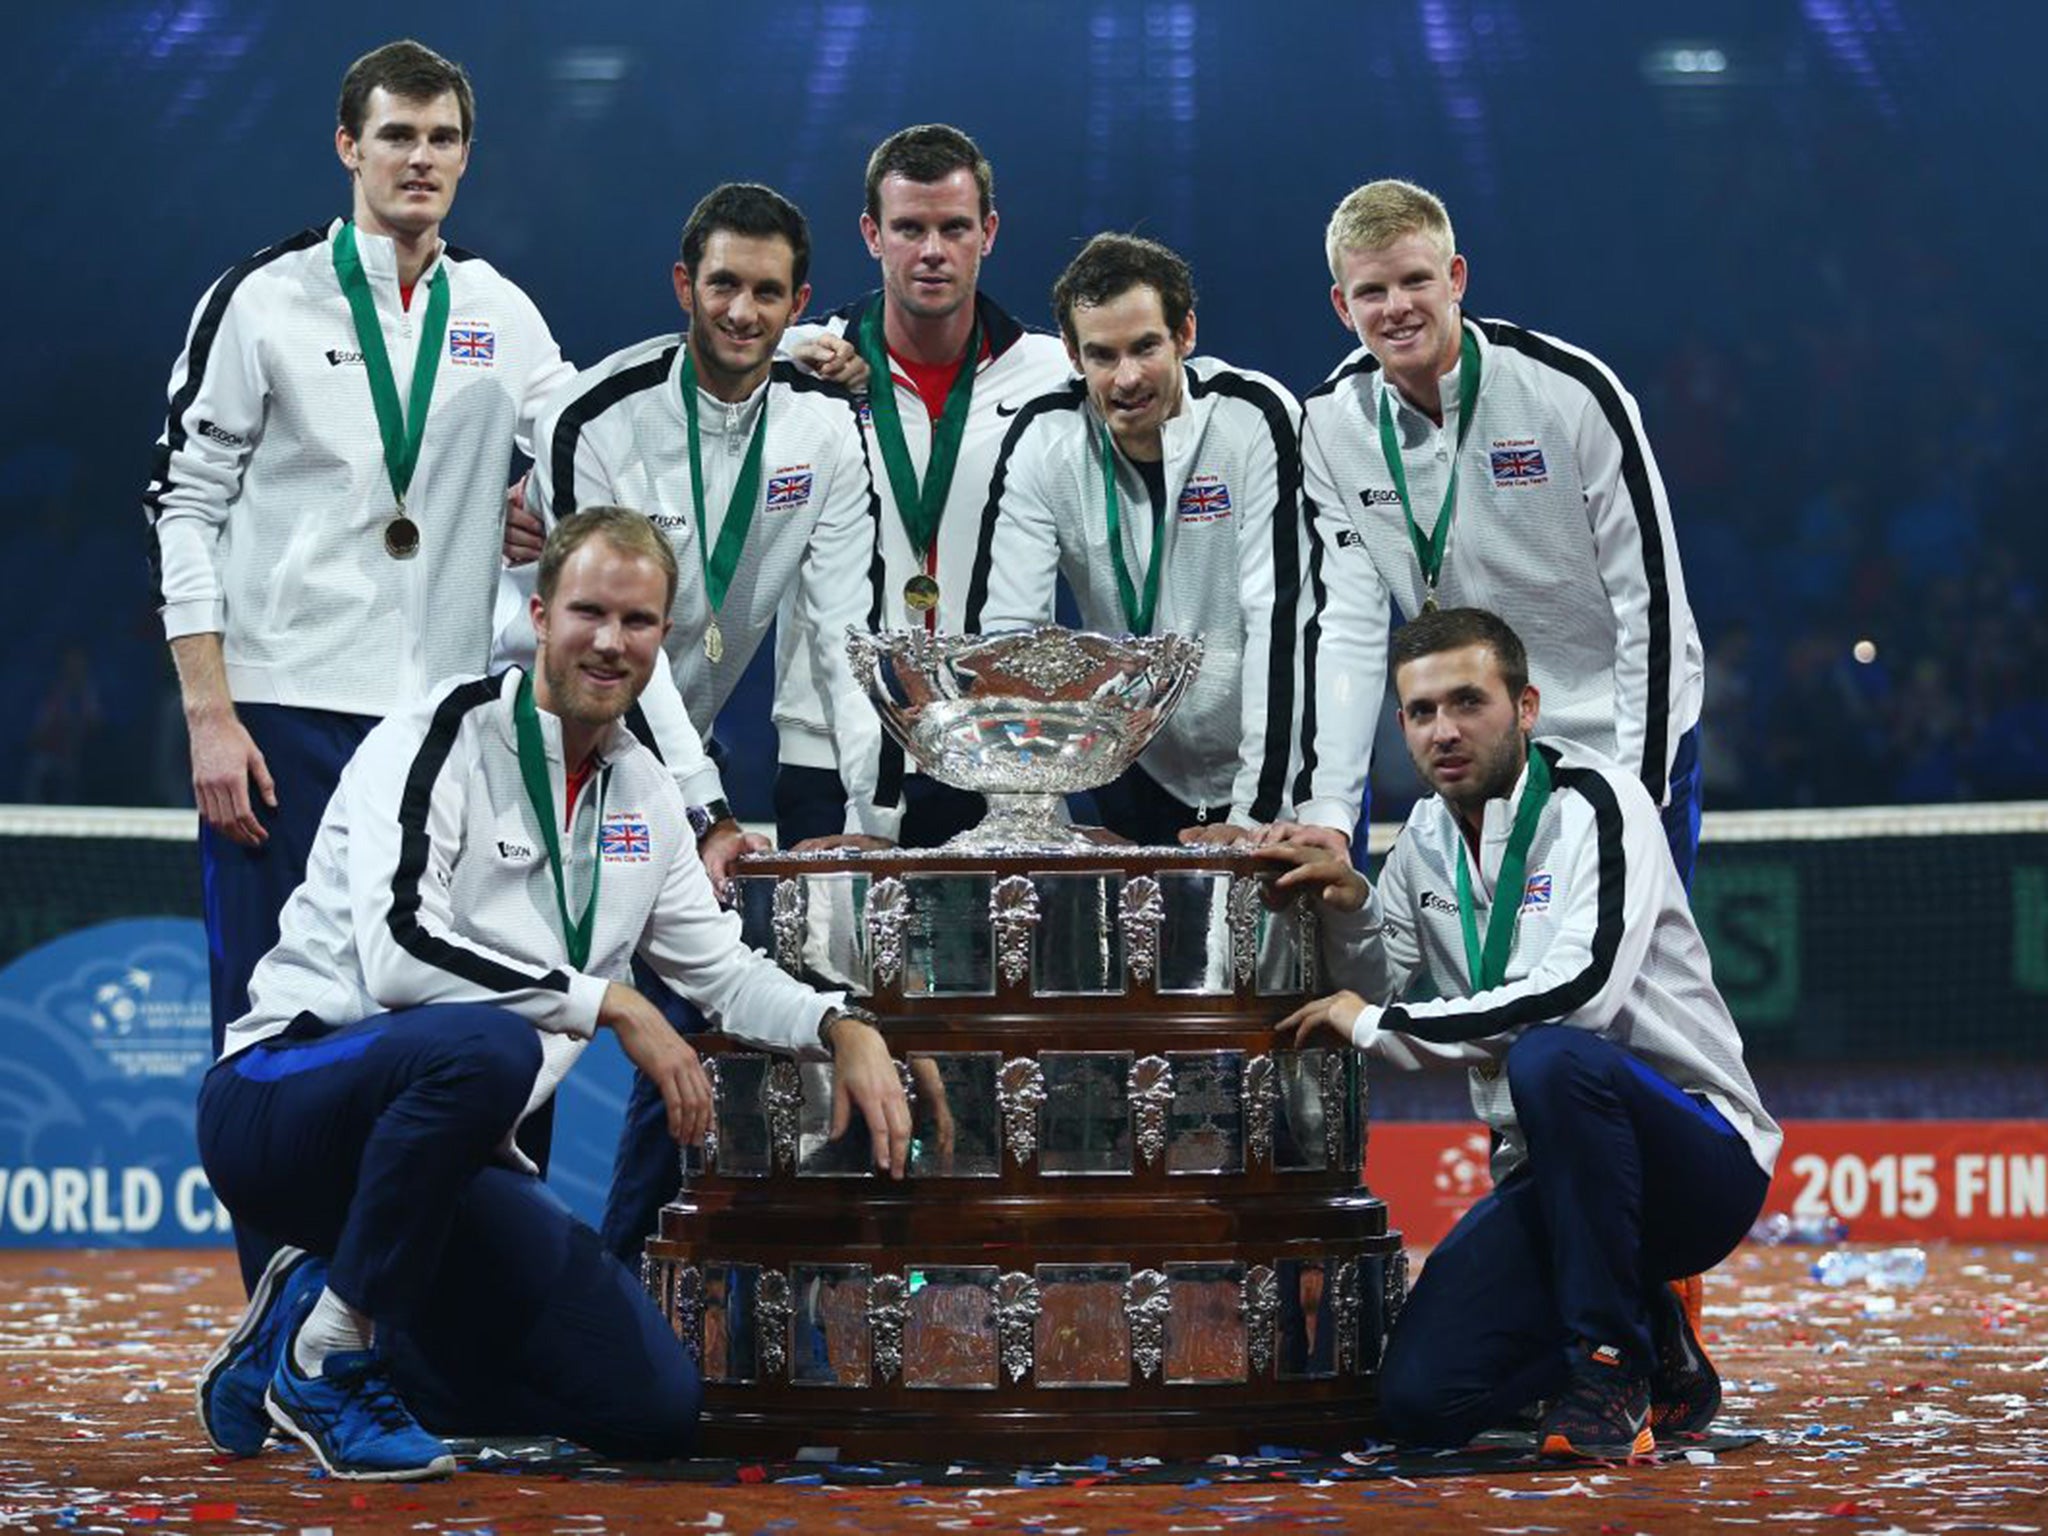 Andy Murray and Co celebrate Davis Cup success – but their victory needs some context